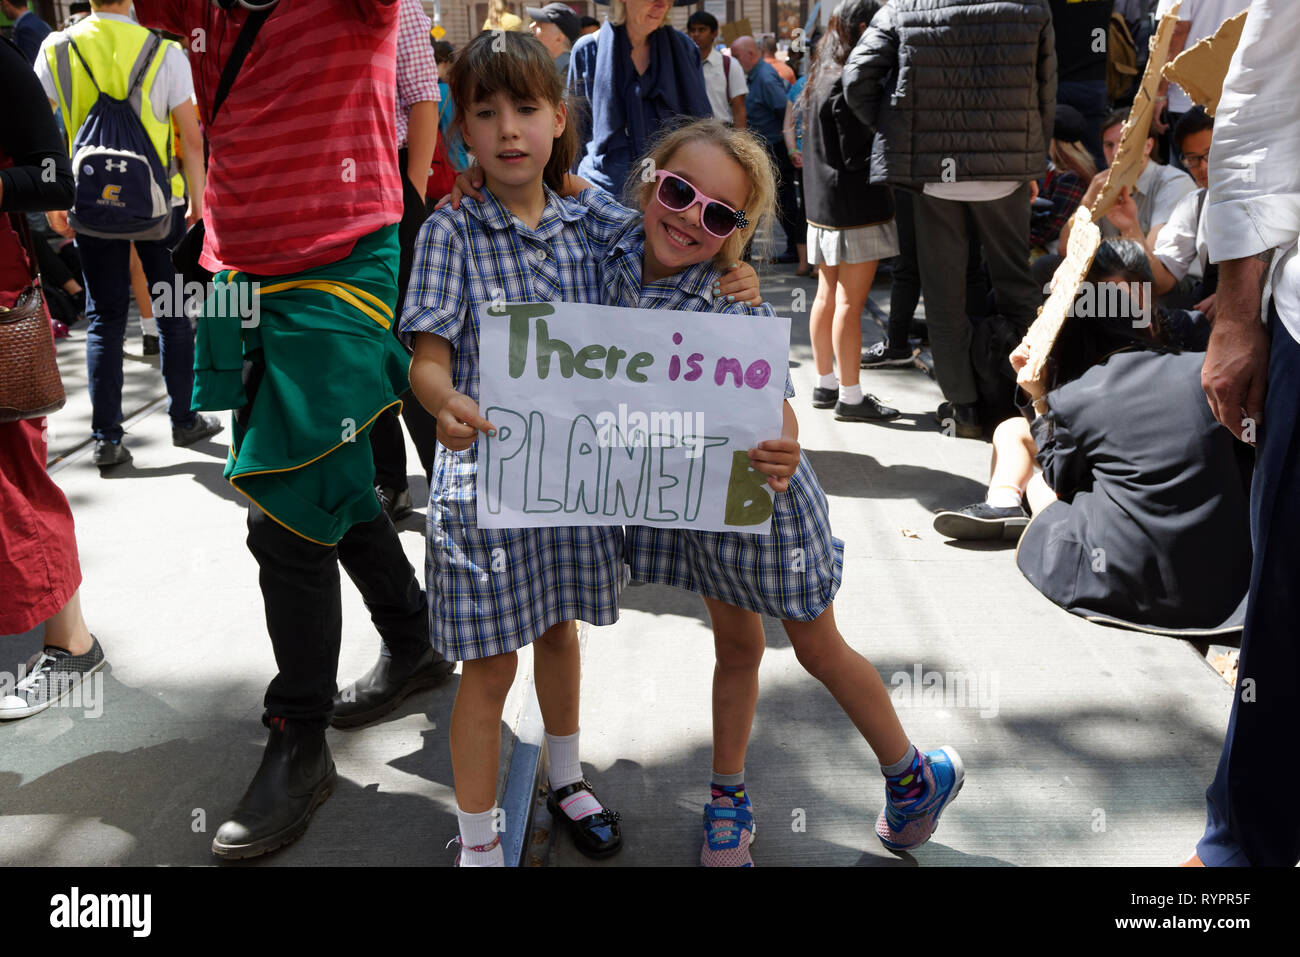 Melbourne, Australia. 15th March, 2019. Thousands of school students in Melbourne take part in the School Strike for Climate protest today as part of a national and global movement by students for greater urgency from politicians in tackling Climate Change which they see as the greatest threat to their future. Credit: Steven Sklifas/Alamy Live News Stock Photo